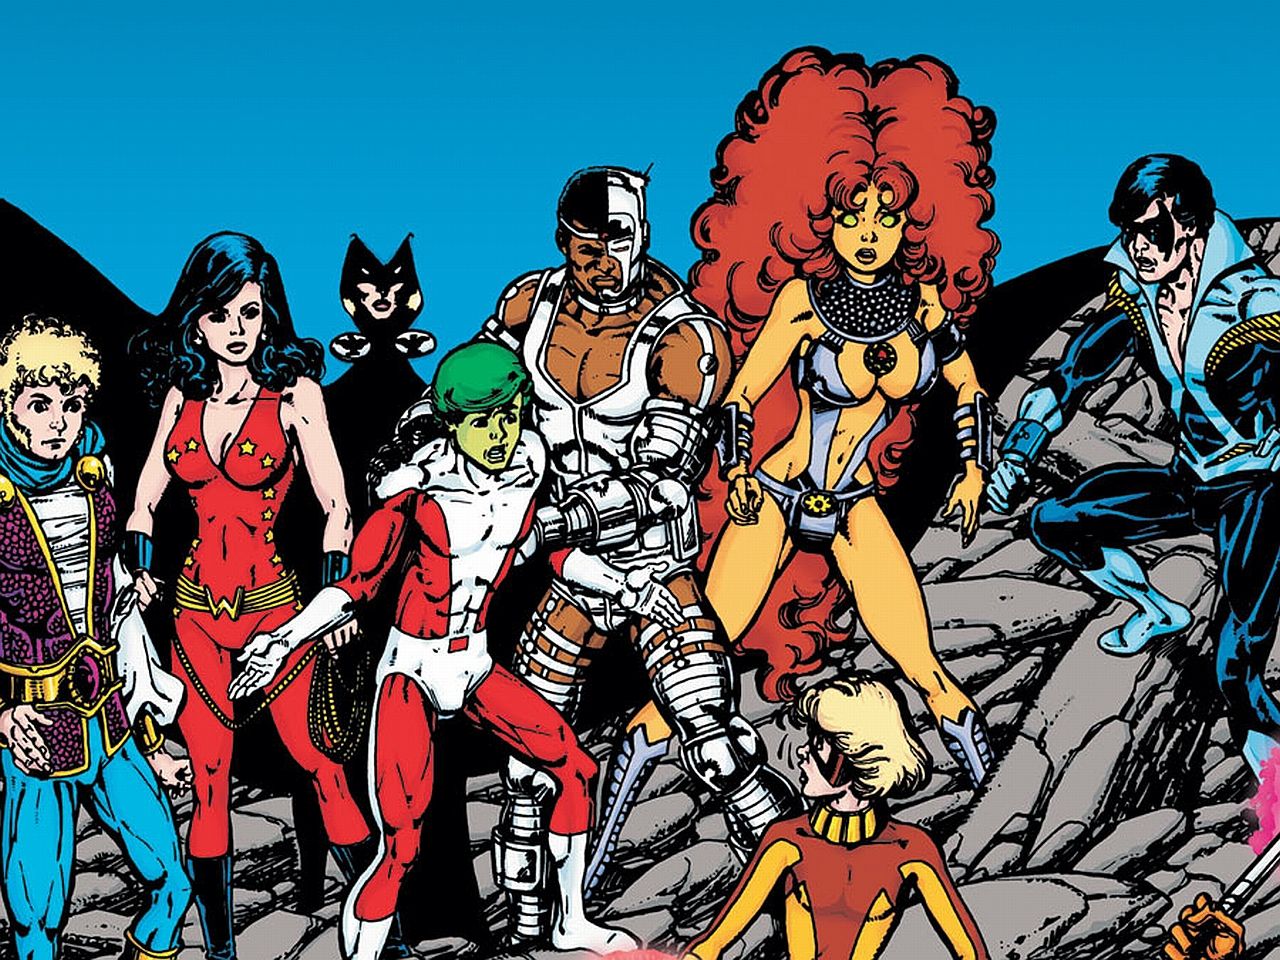 Titans Together! TITANS Series May Find Home at TNT